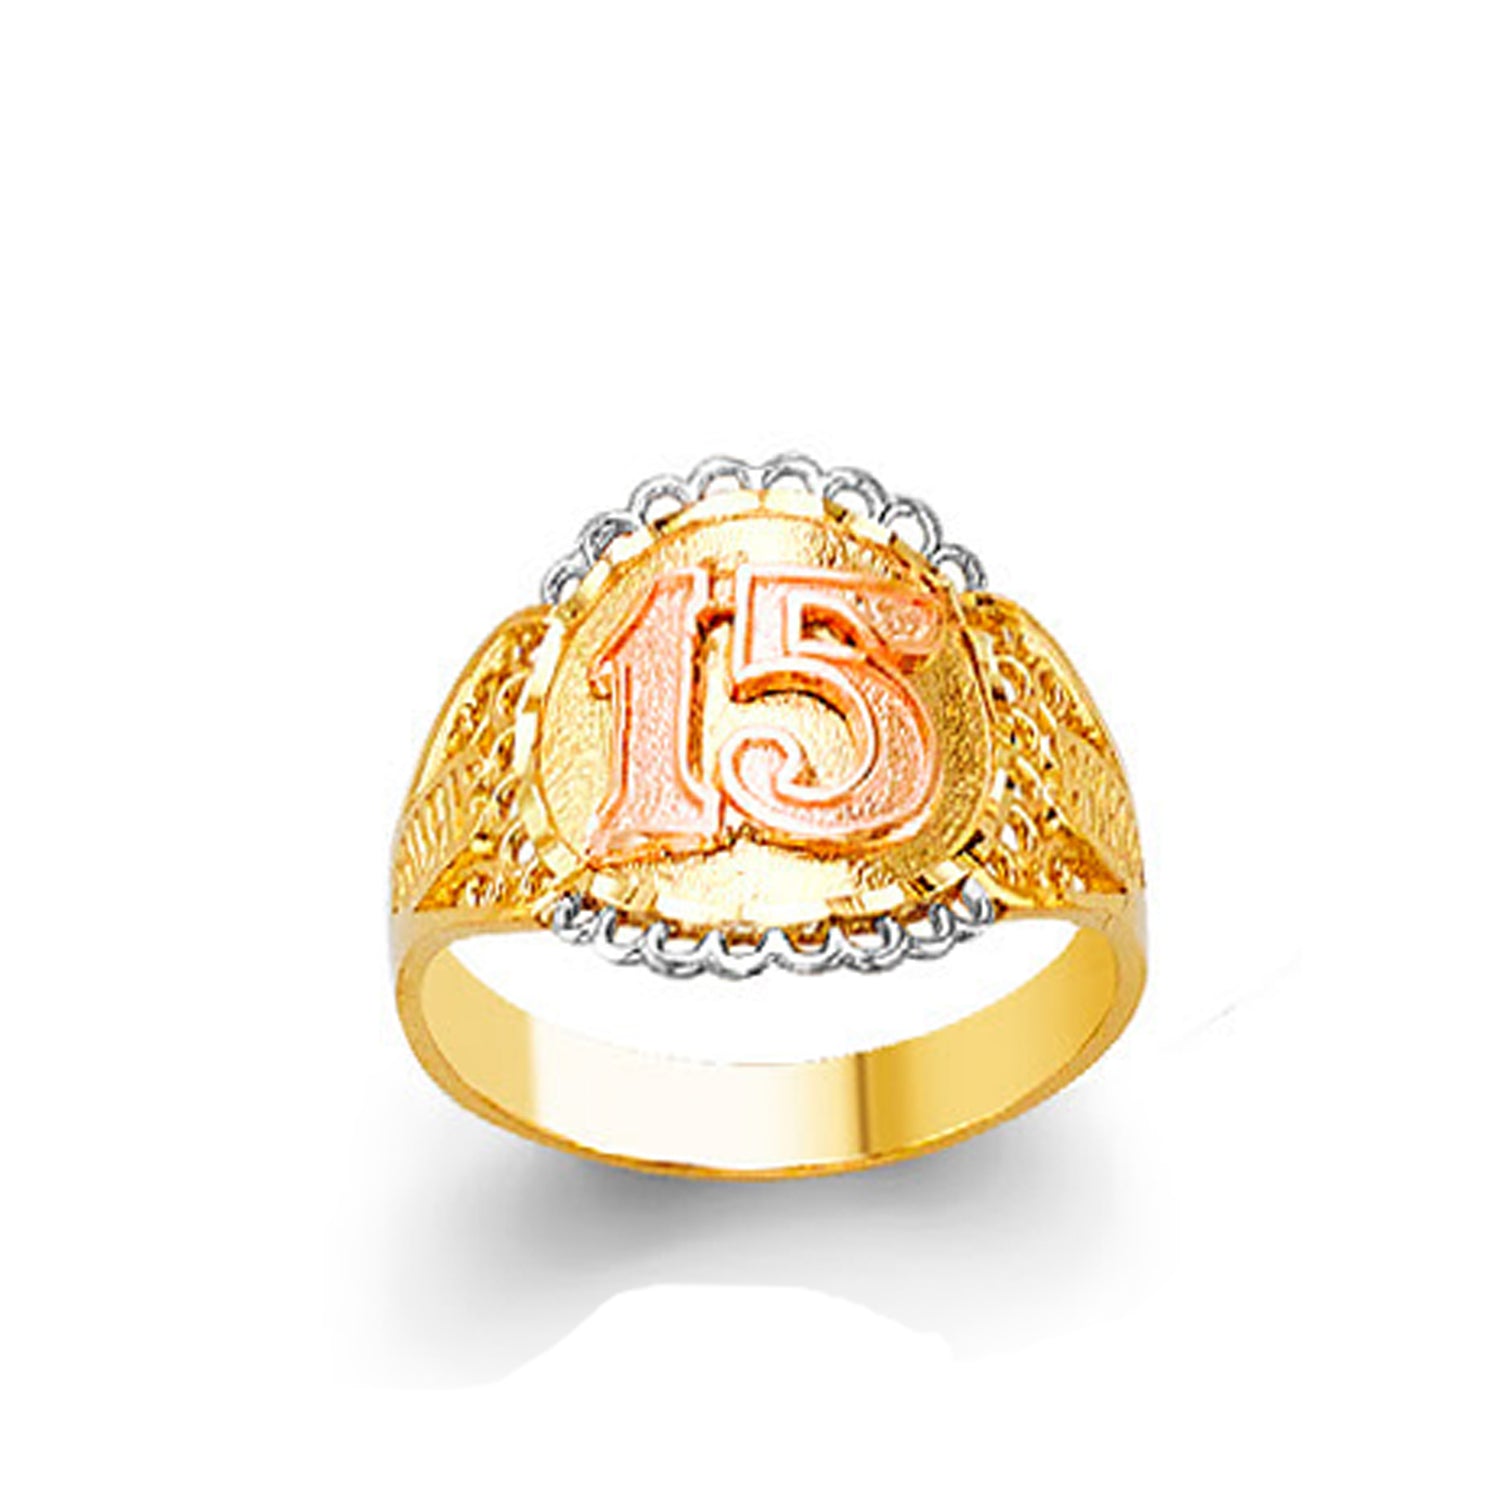 Customized 15 Years Casting Anniversary Ring in Solid Gold 